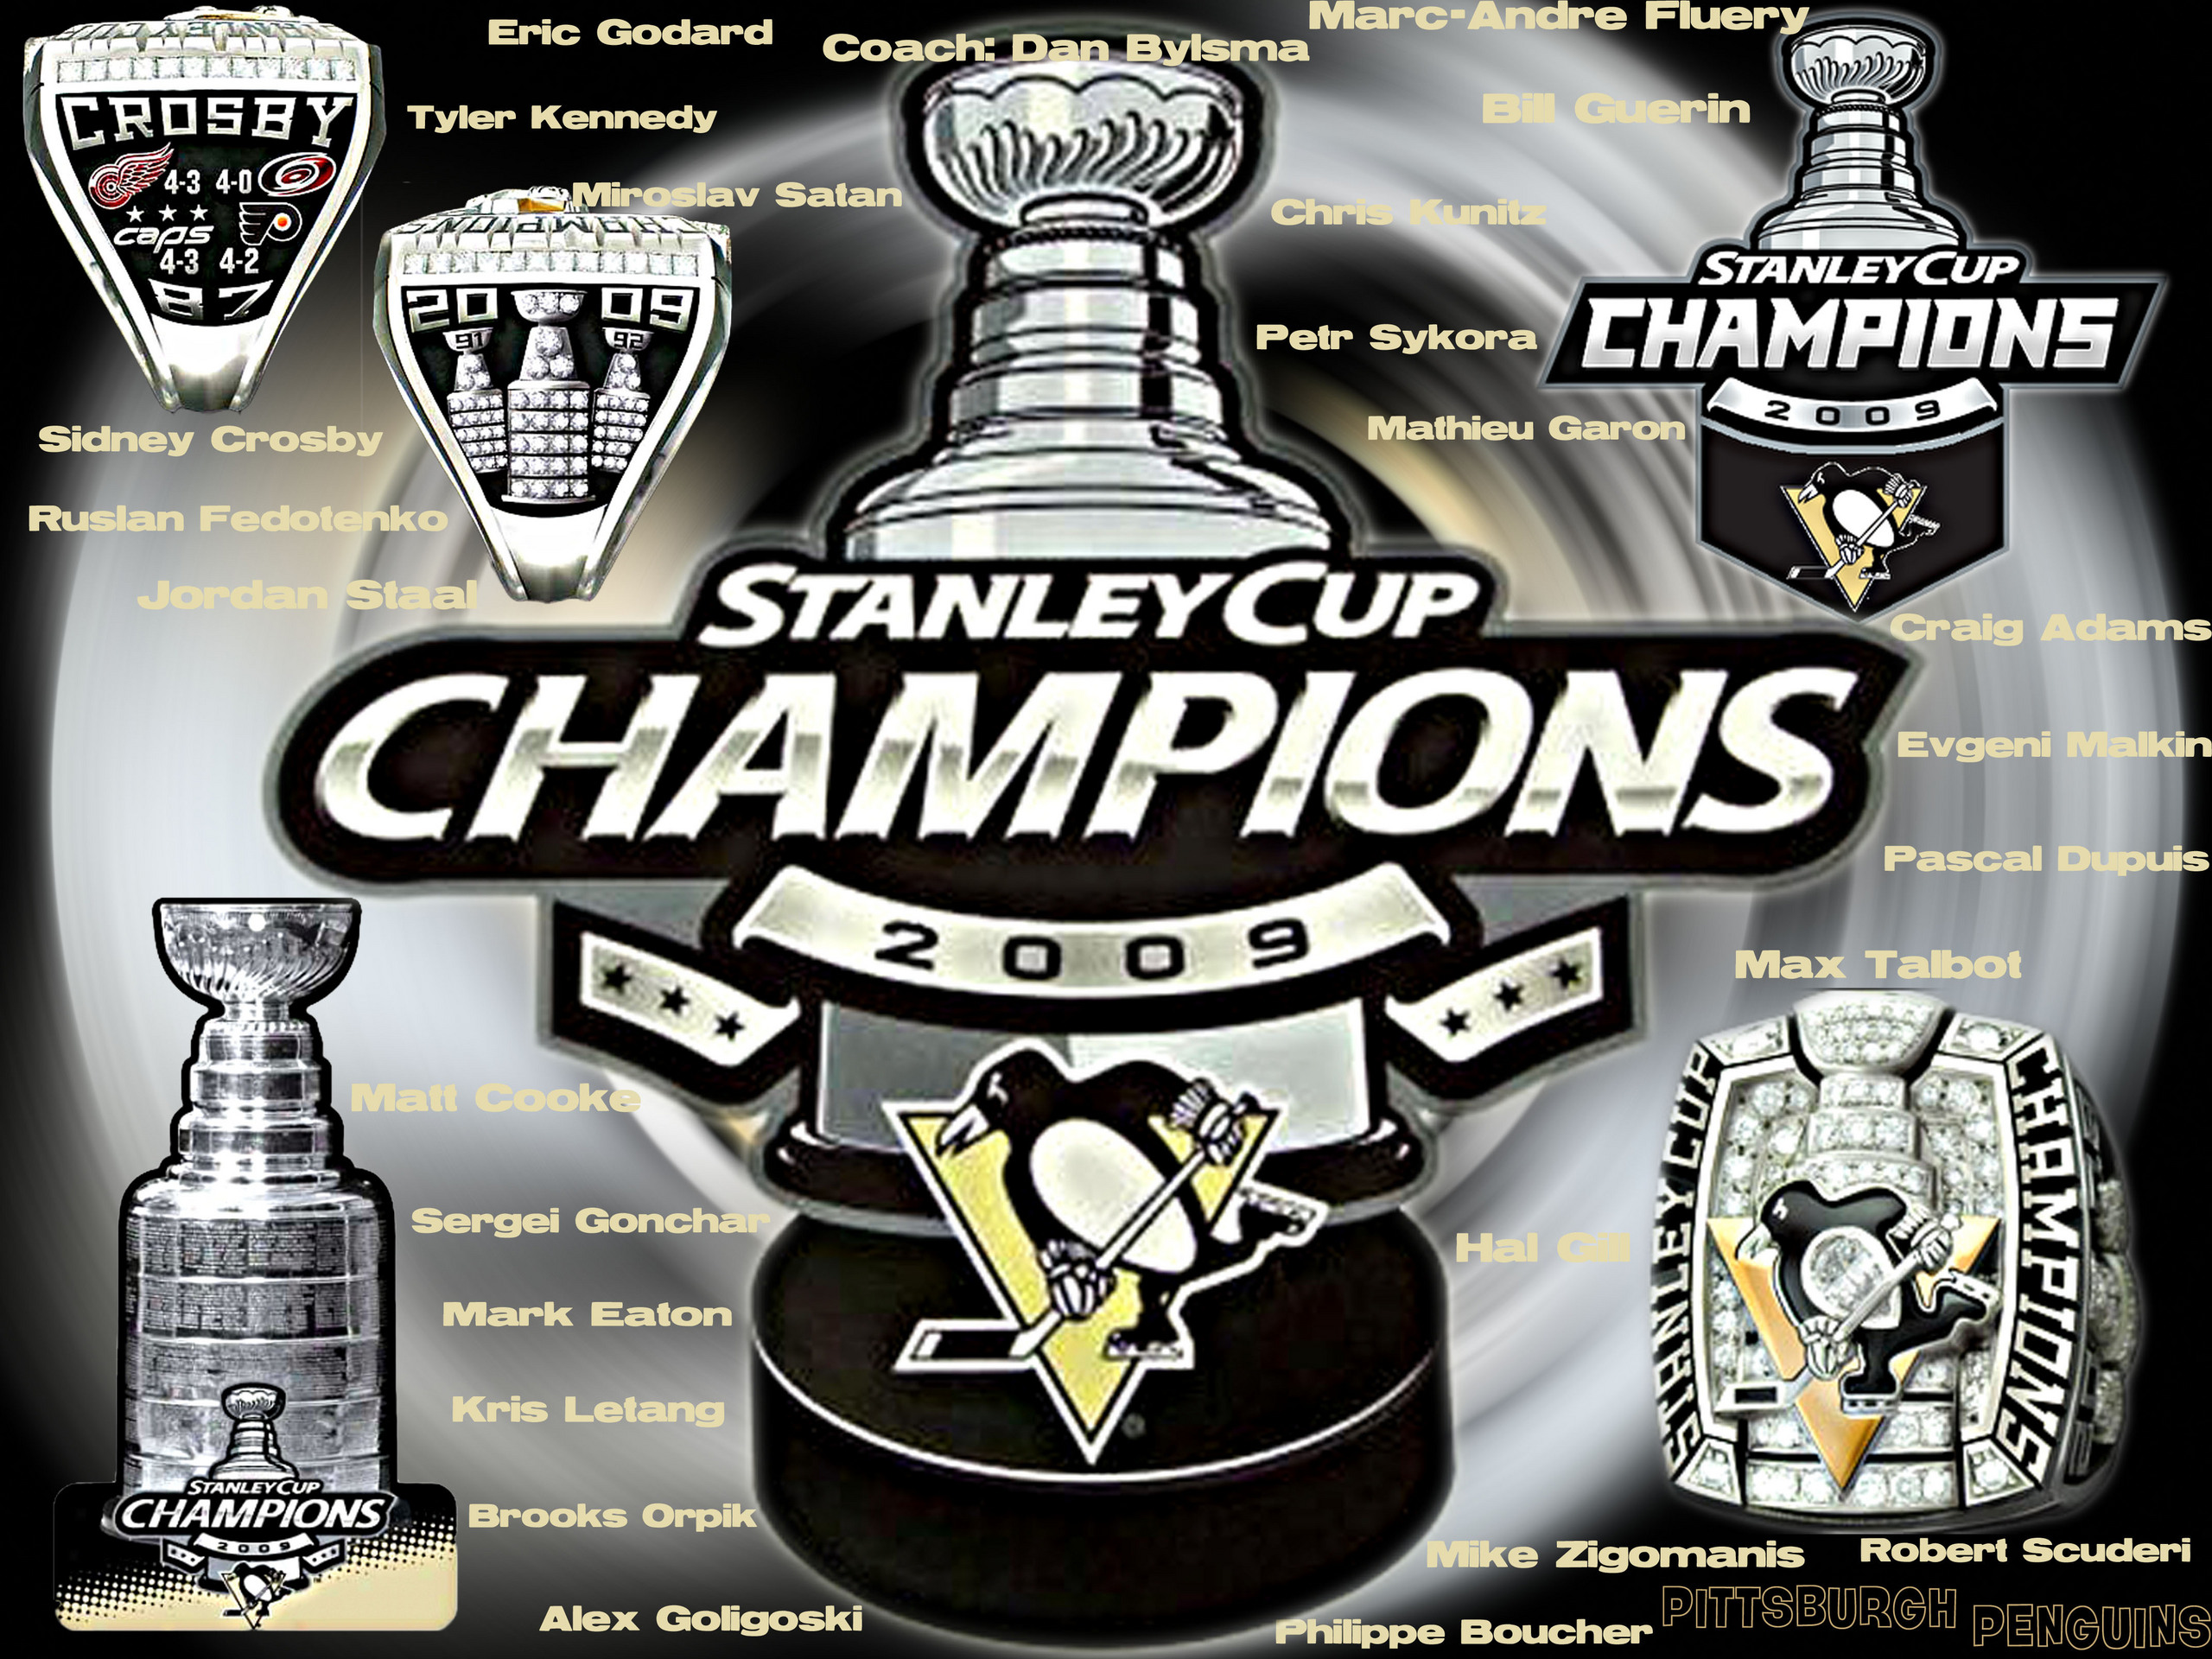 Pittsburgh Penguins Image Stanley Cup Champions HD Wallpaper And